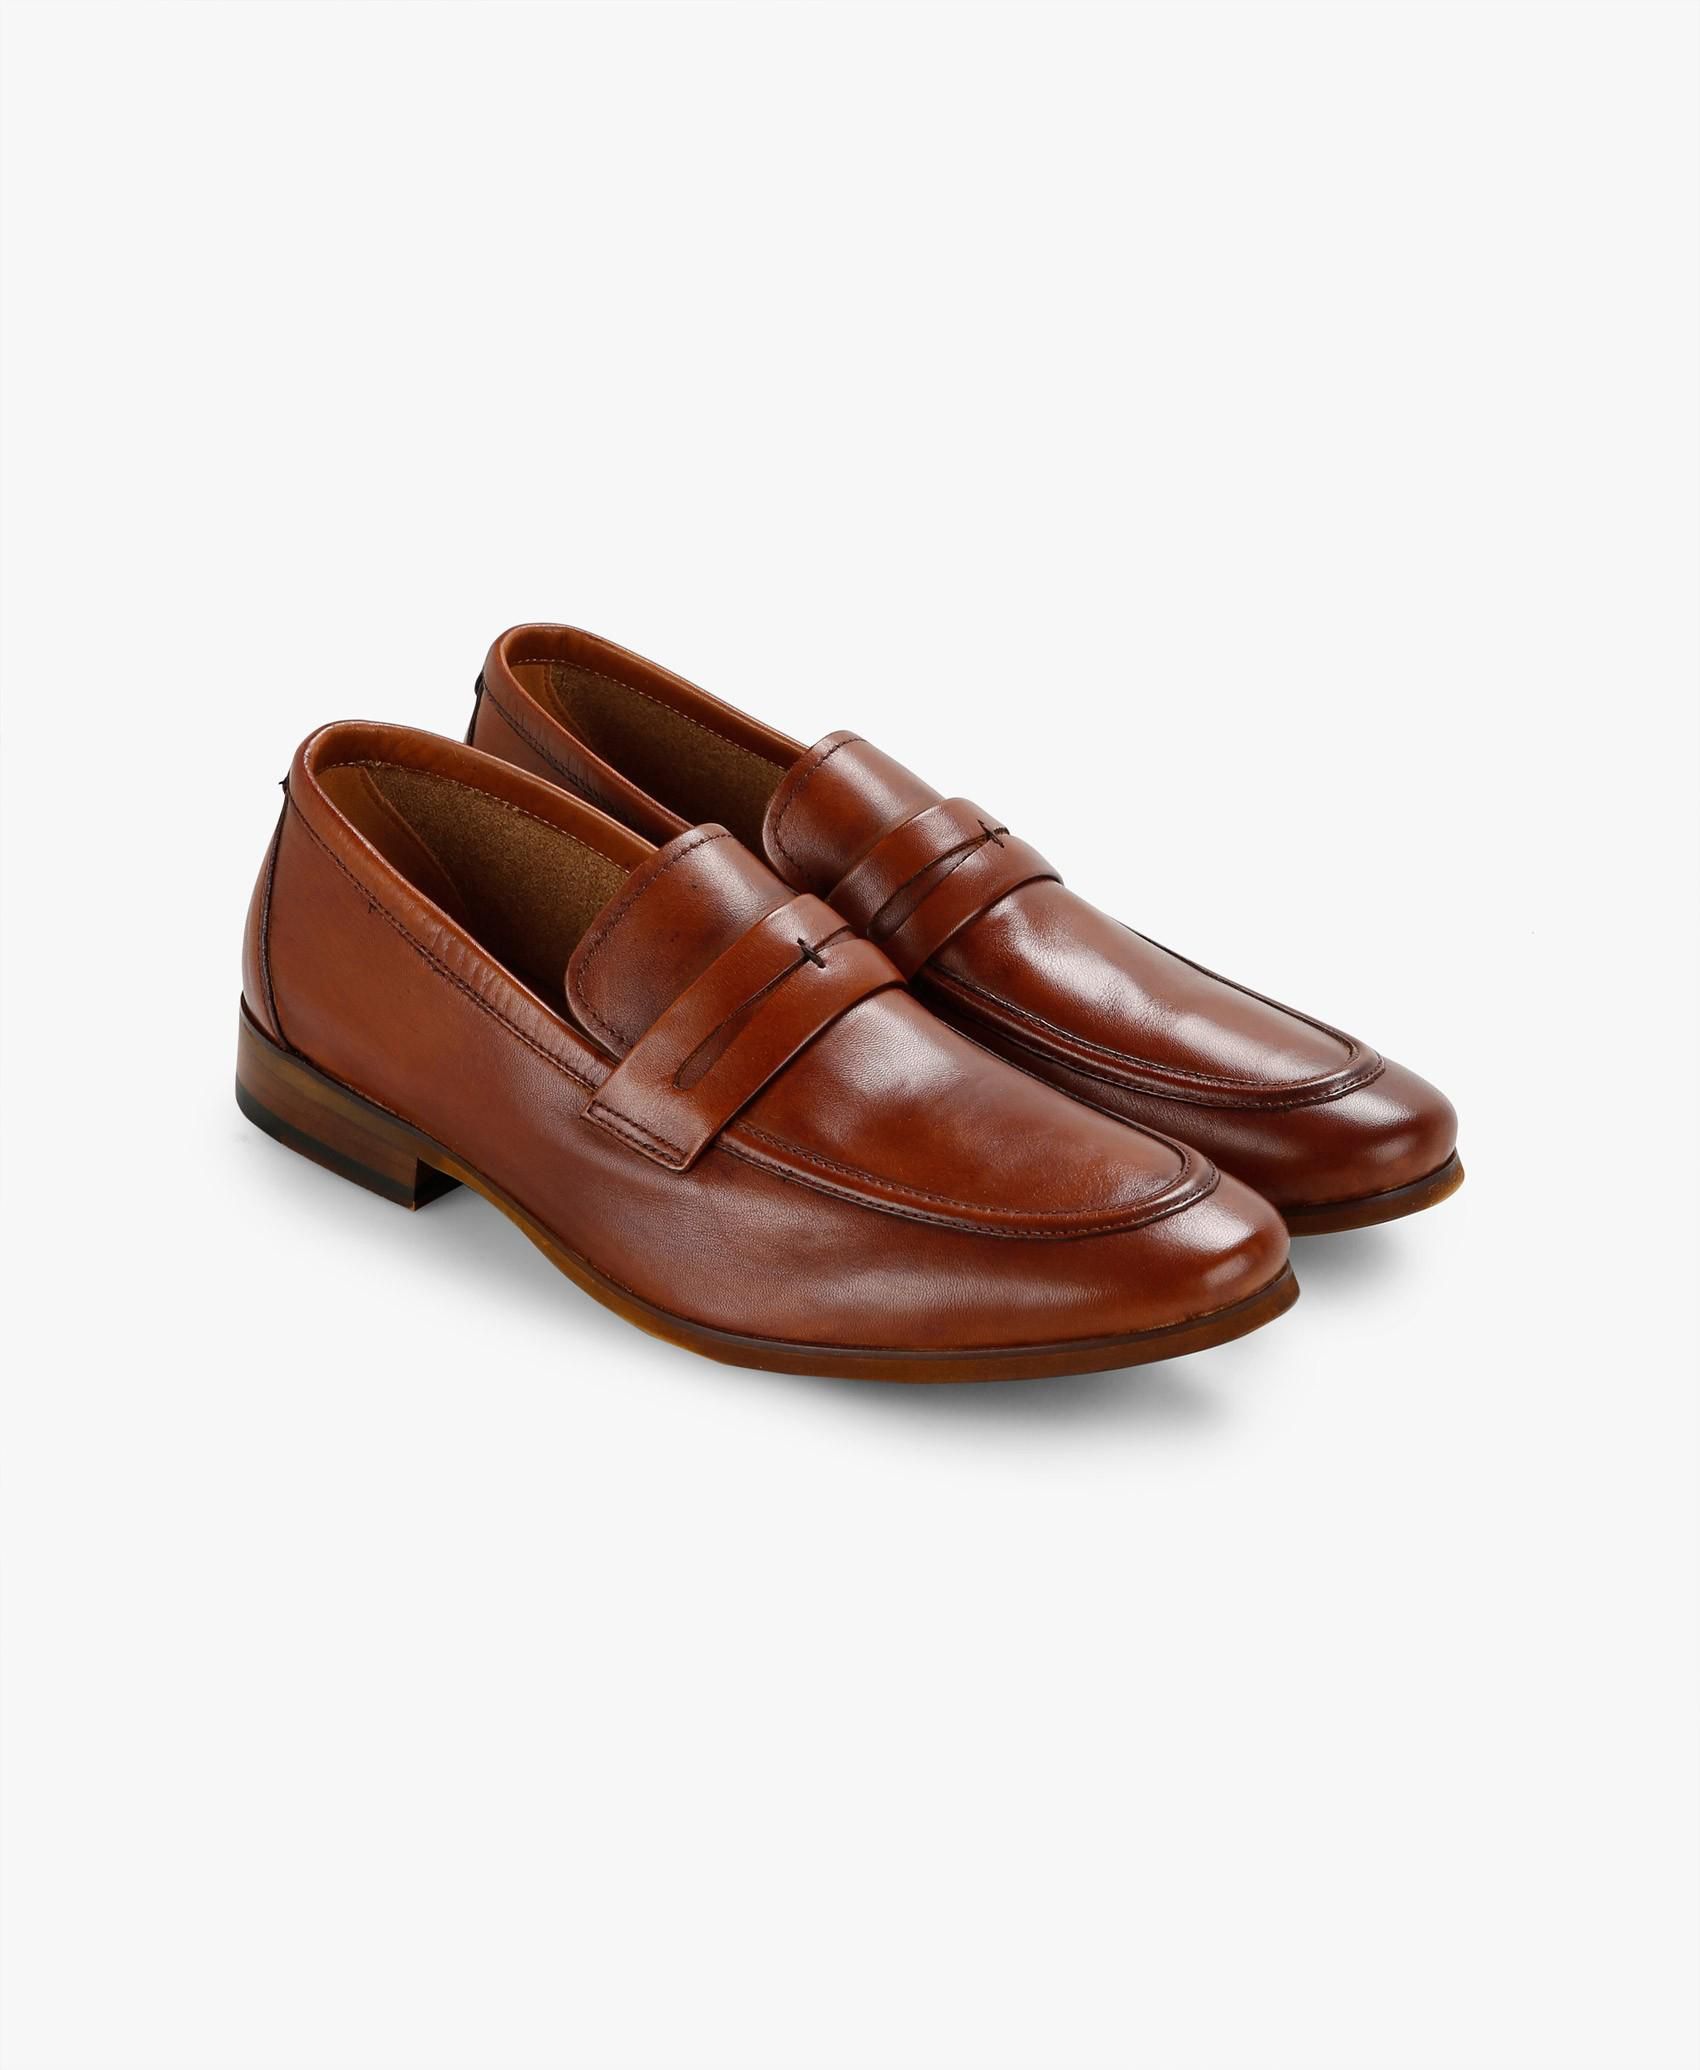 Menani Penny Loafers